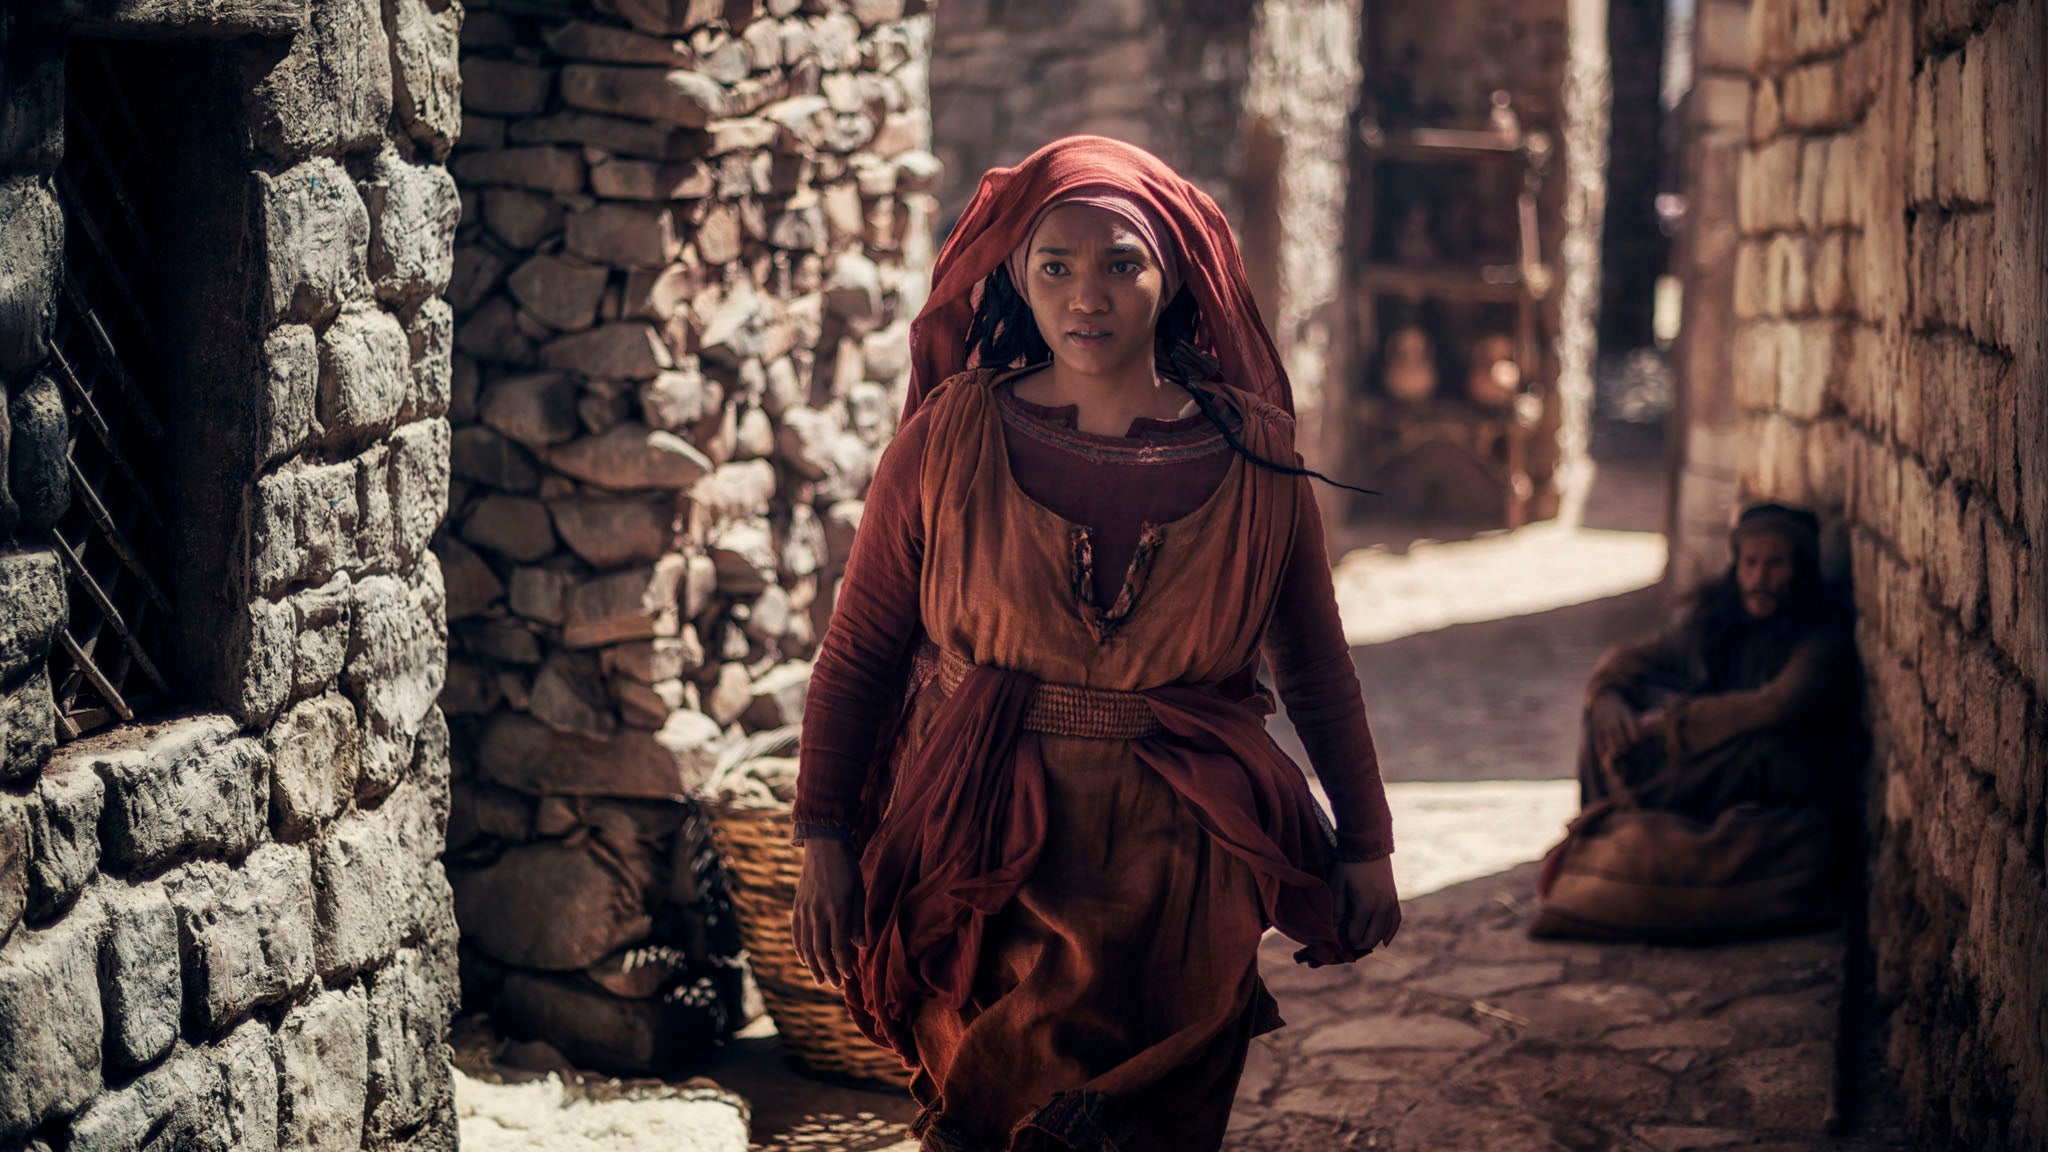 Chipo Chung as Mary Magdalene in A.D